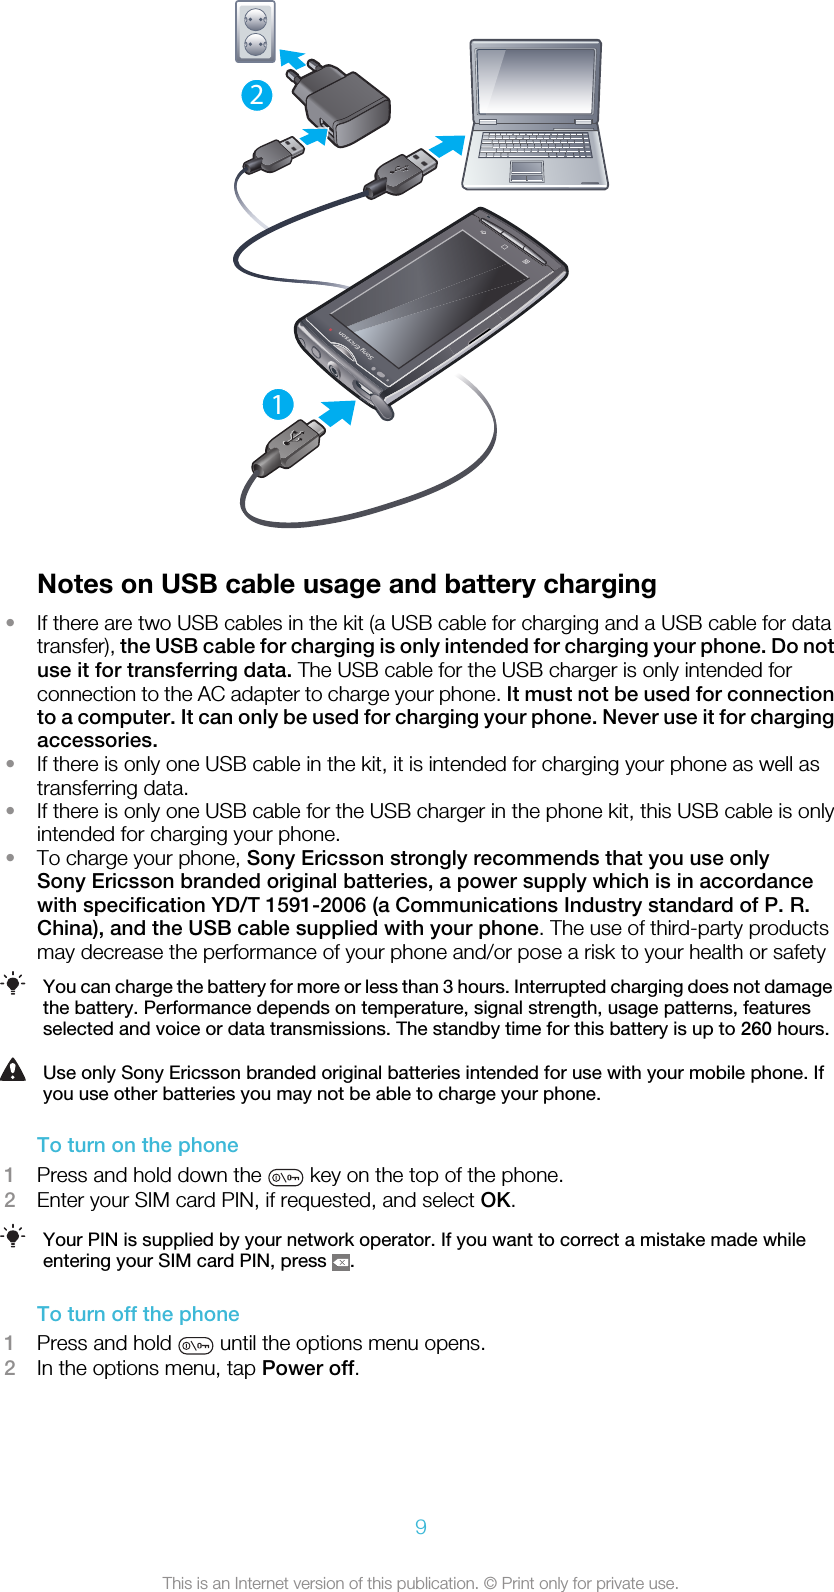 12Notes on USB cable usage and battery charging•If there are two USB cables in the kit (a USB cable for charging and a USB cable for datatransfer), the USB cable for charging is only intended for charging your phone. Do notuse it for transferring data. The USB cable for the USB charger is only intended forconnection to the AC adapter to charge your phone. It must not be used for connectionto a computer. It can only be used for charging your phone. Never use it for chargingaccessories.•If there is only one USB cable in the kit, it is intended for charging your phone as well astransferring data.•If there is only one USB cable for the USB charger in the phone kit, this USB cable is onlyintended for charging your phone.•To charge your phone, Sony Ericsson strongly recommends that you use onlySony Ericsson branded original batteries, a power supply which is in accordancewith specification YD/T 1591-2006 (a Communications Industry standard of P. R.China), and the USB cable supplied with your phone. The use of third-party productsmay decrease the performance of your phone and/or pose a risk to your health or safetyYou can charge the battery for more or less than 3 hours. Interrupted charging does not damagethe battery. Performance depends on temperature, signal strength, usage patterns, featuresselected and voice or data transmissions. The standby time for this battery is up to 260 hours.Use only Sony Ericsson branded original batteries intended for use with your mobile phone. Ifyou use other batteries you may not be able to charge your phone.To turn on the phone1Press and hold down the   key on the top of the phone.2Enter your SIM card PIN, if requested, and select OK.Your PIN is supplied by your network operator. If you want to correct a mistake made whileentering your SIM card PIN, press  .To turn off the phone1Press and hold   until the options menu opens.2In the options menu, tap Power off.9This is an Internet version of this publication. © Print only for private use.